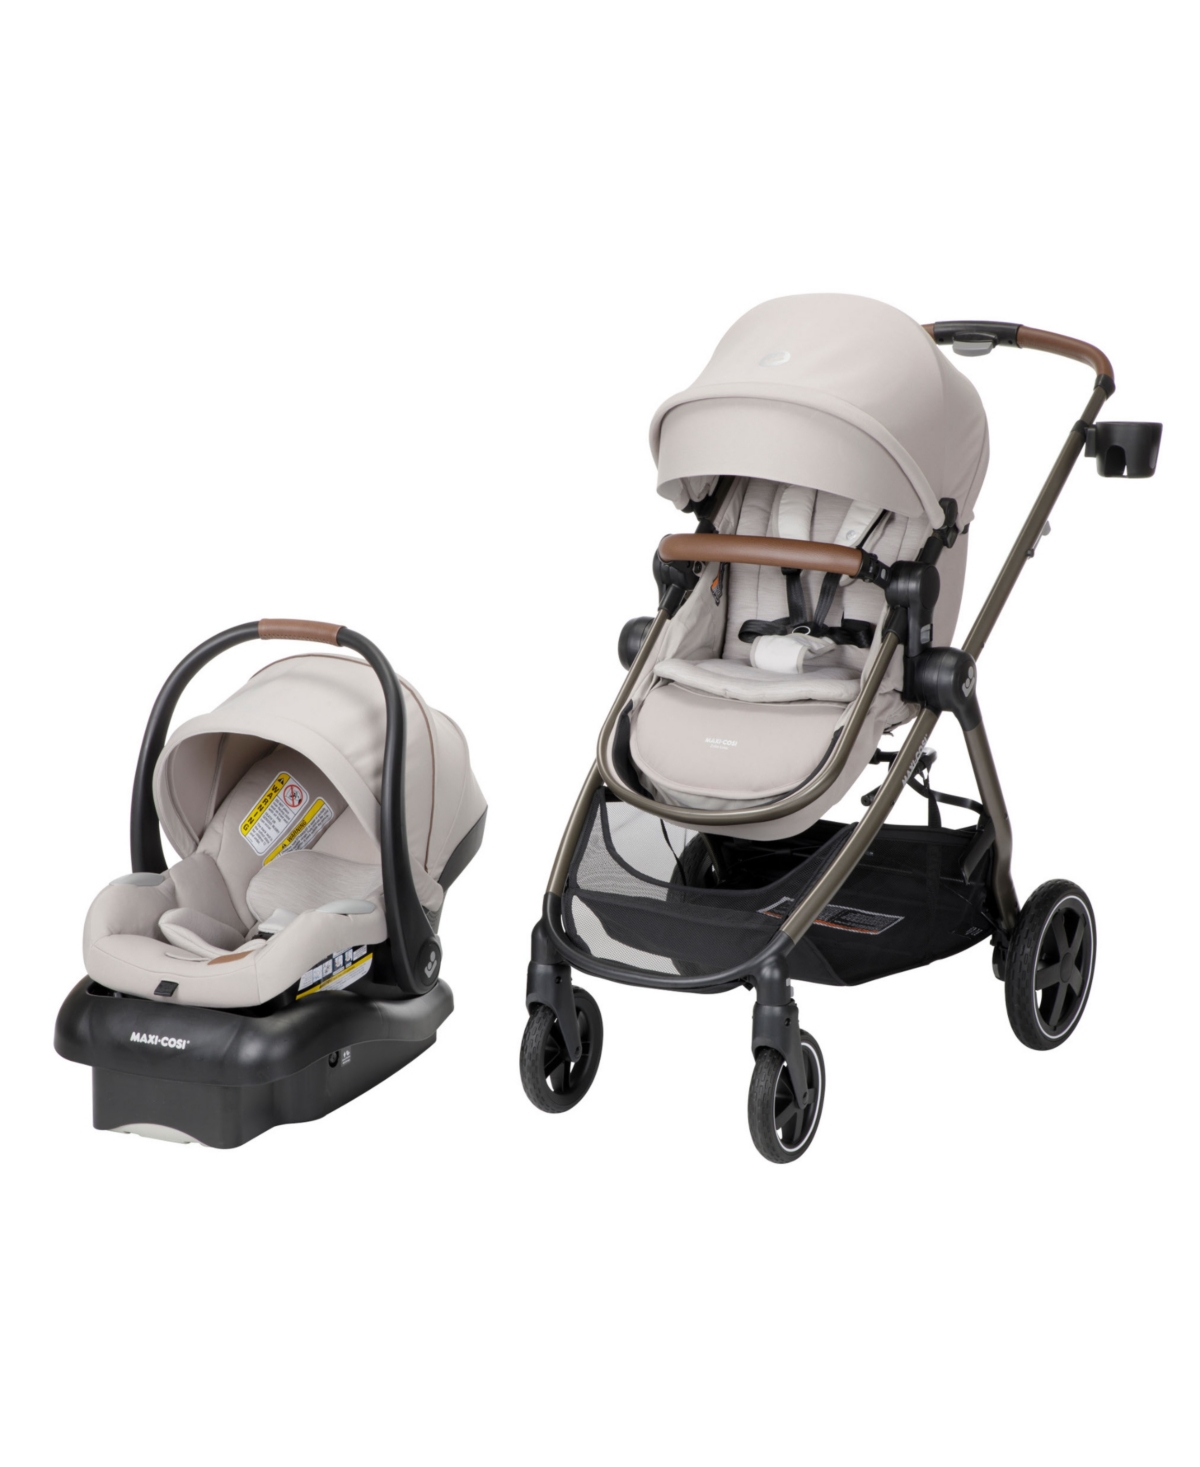 Maxi-cosi Zelia2 Luxe Travel System In New Hope Tan